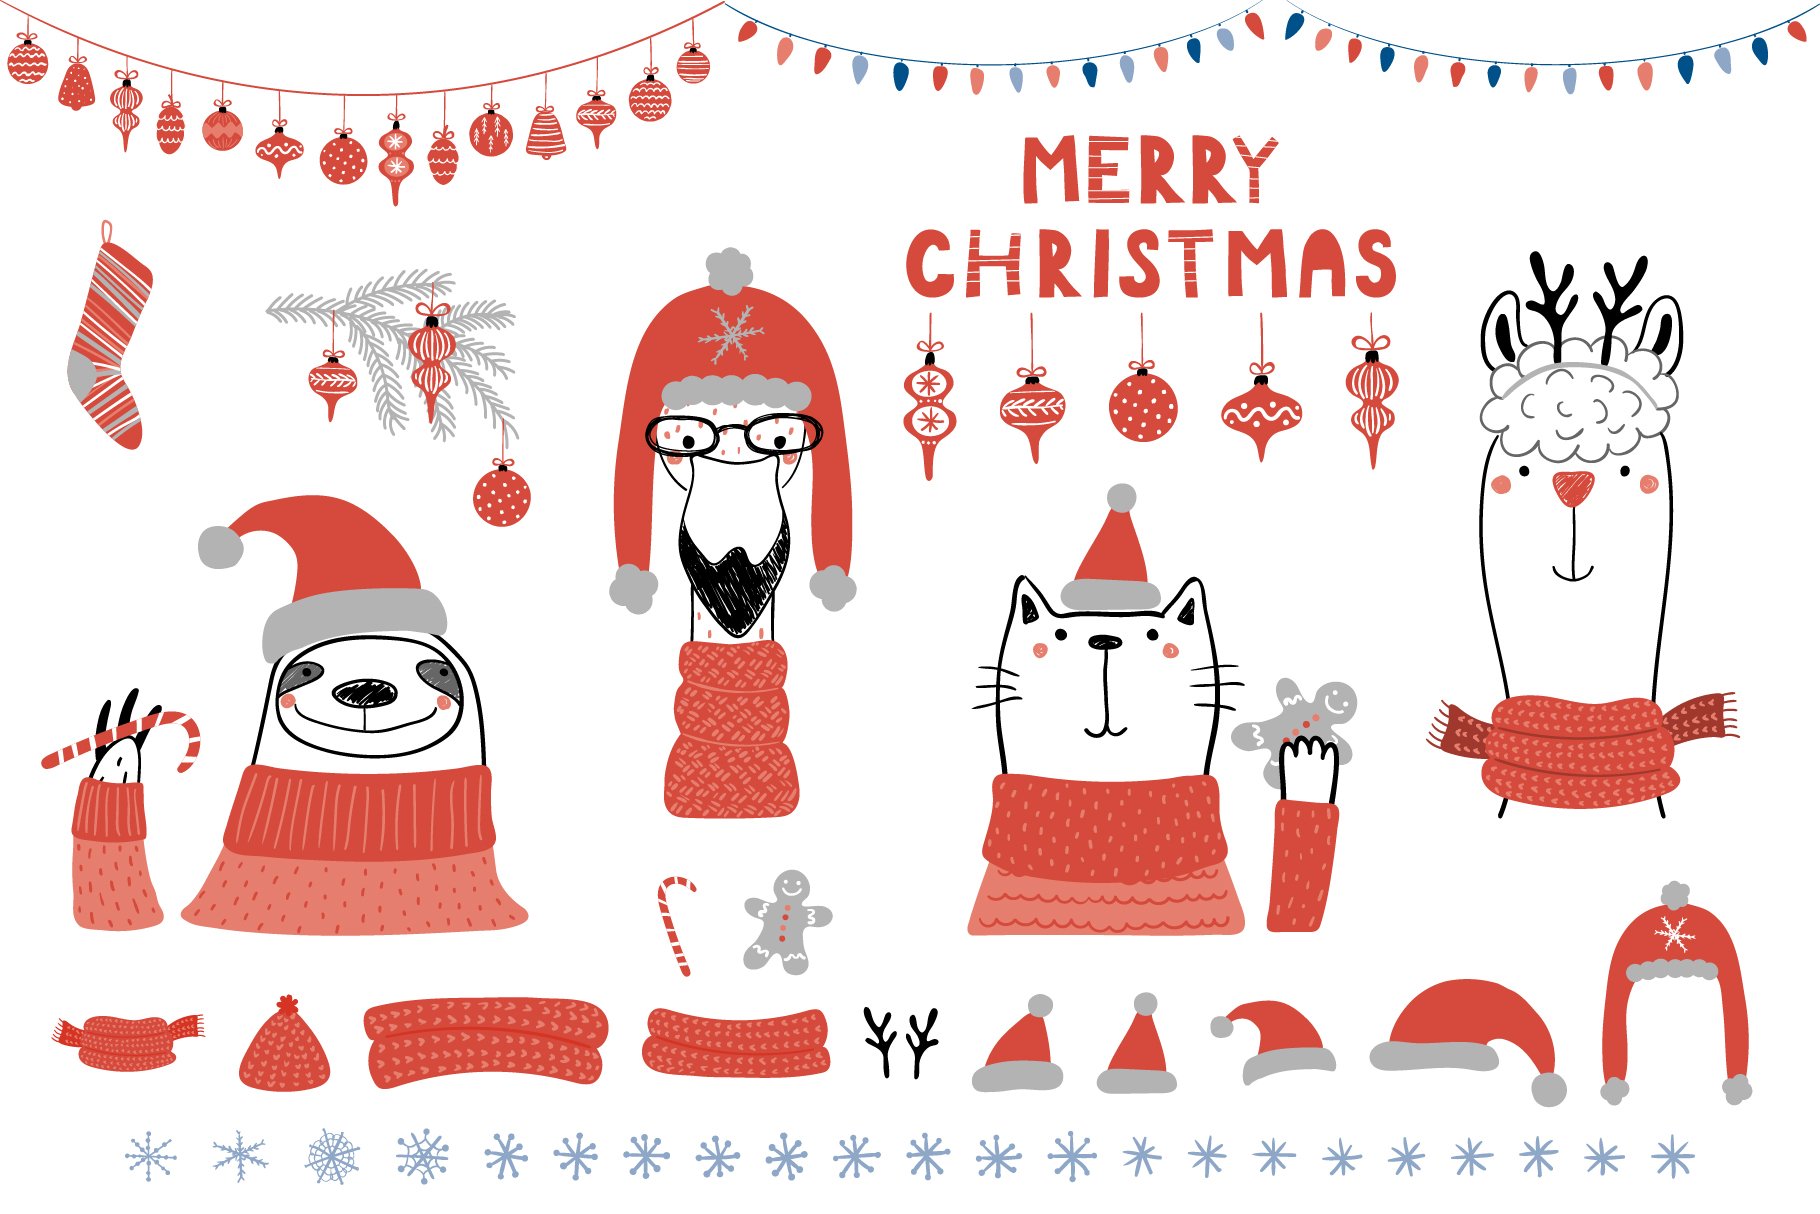 Cool Merry Christmas illustrations.